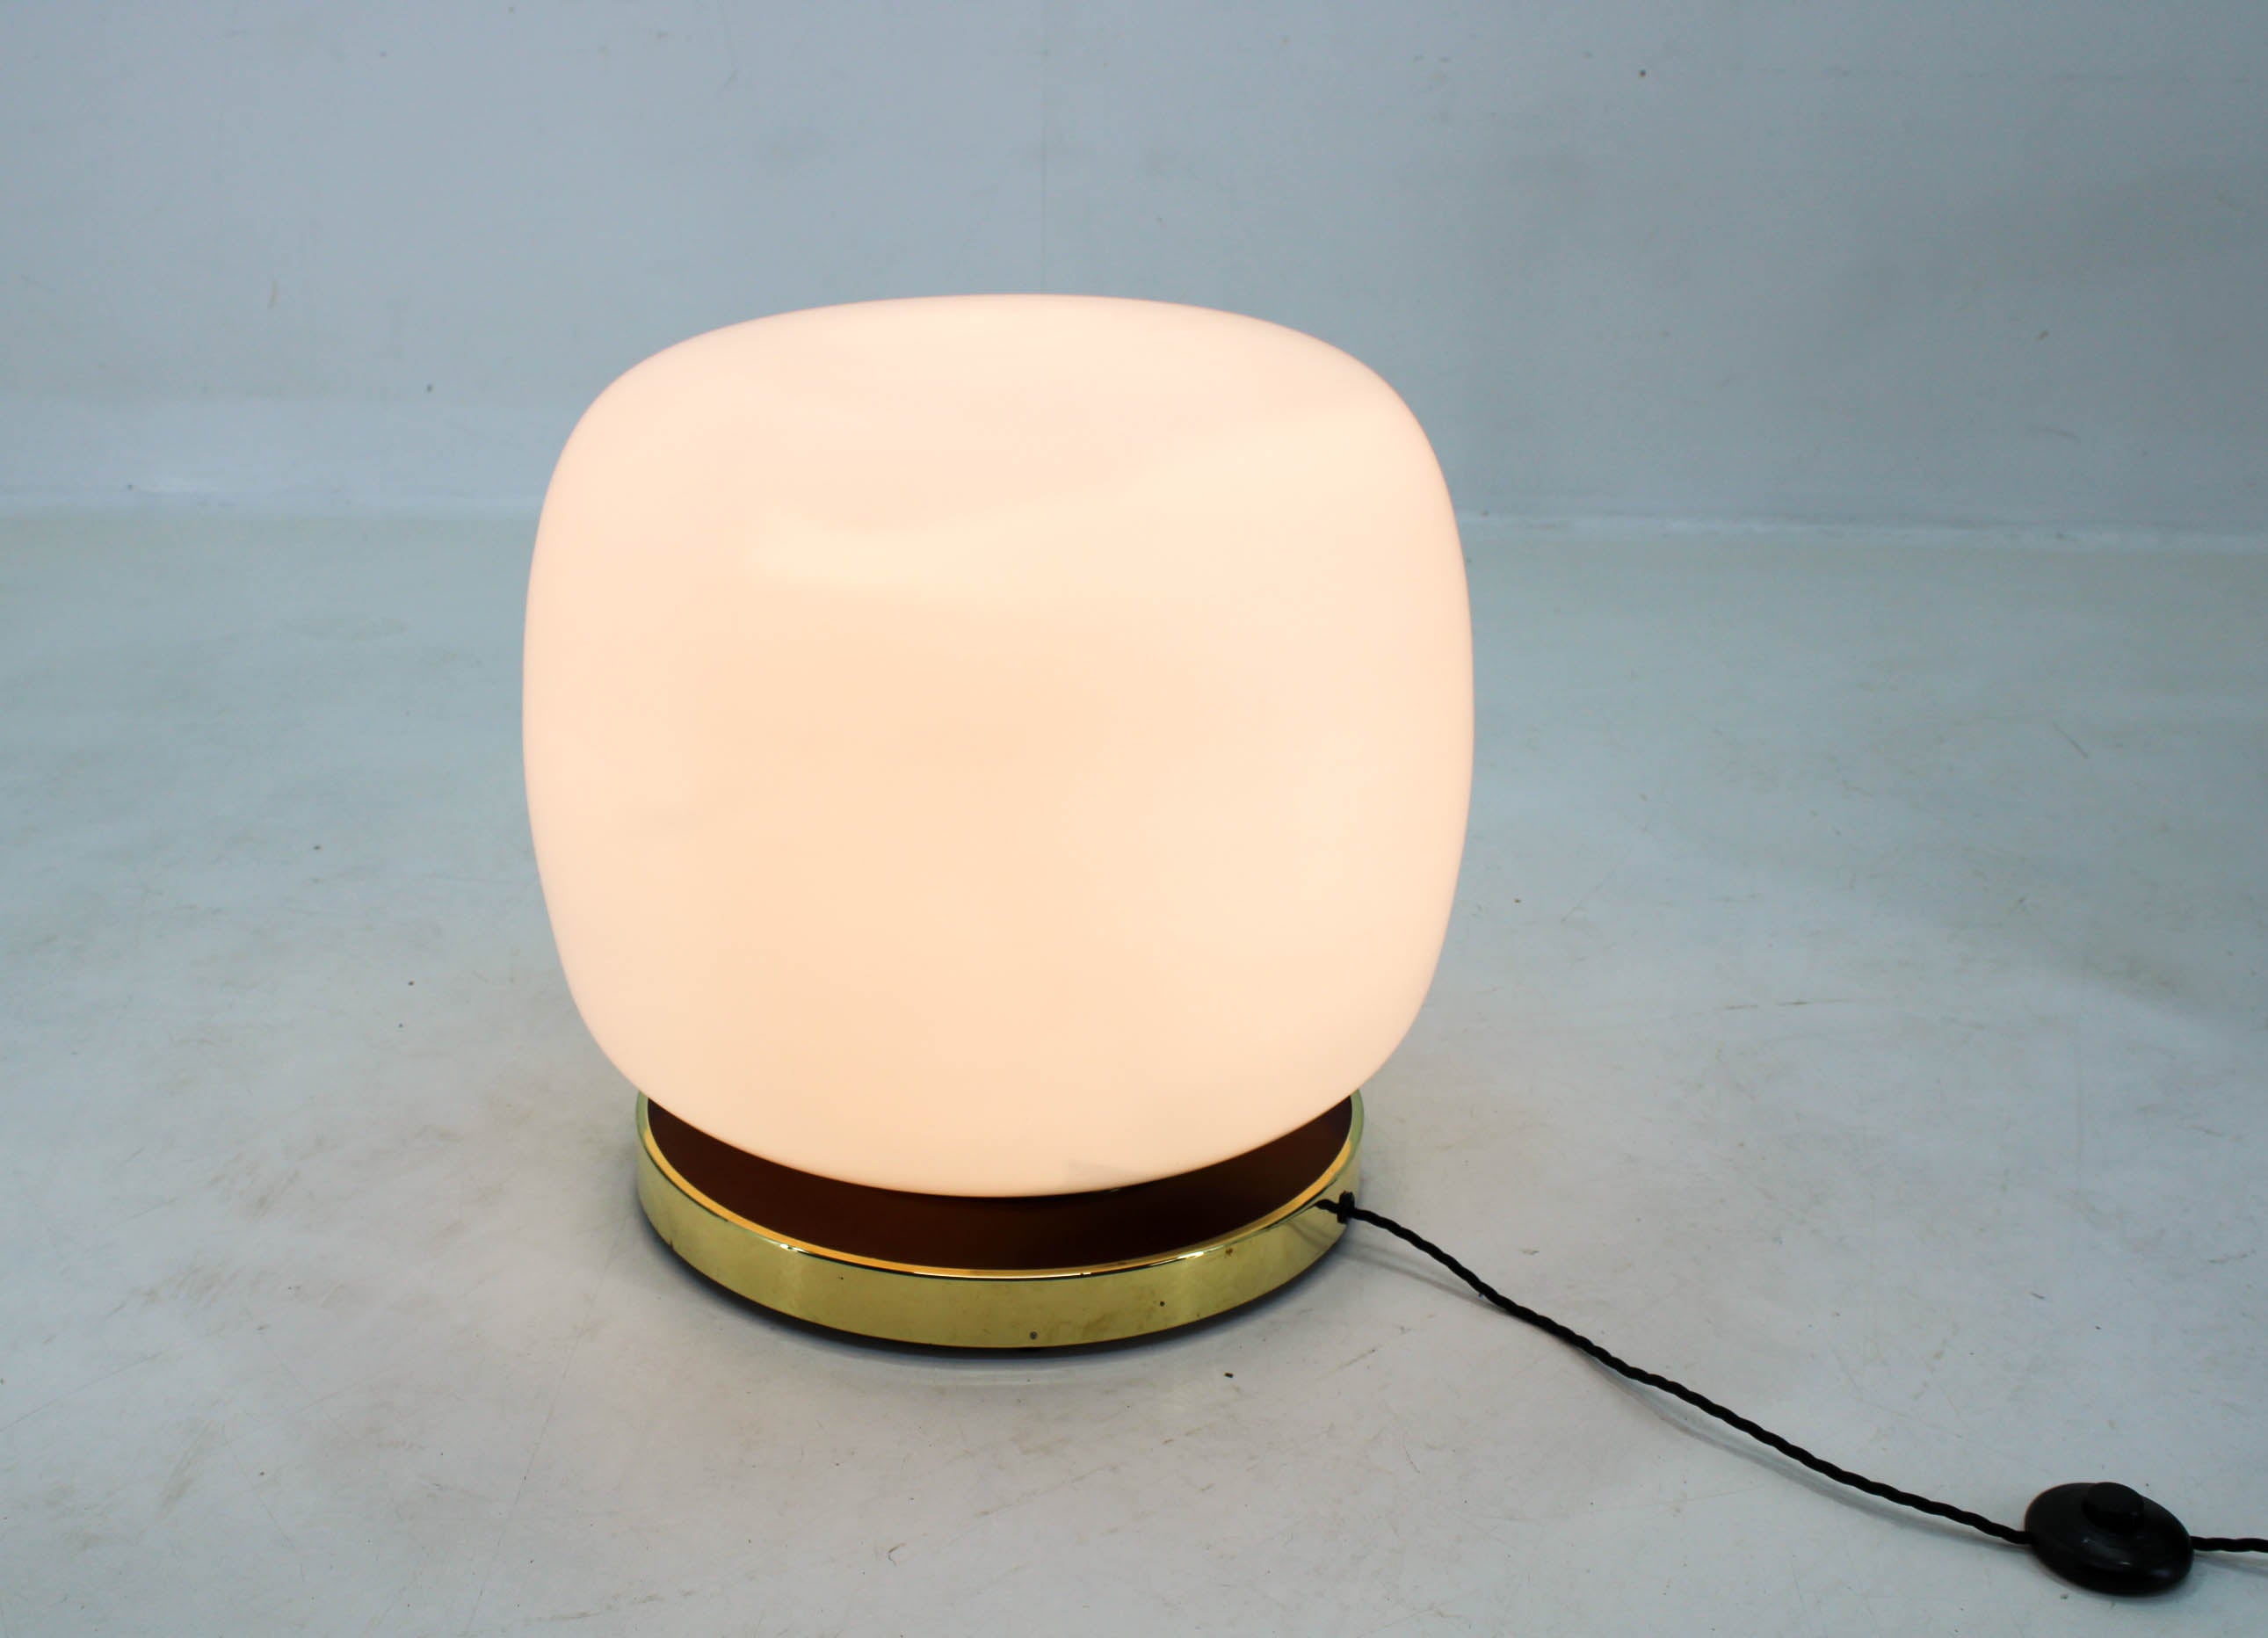 Huge floor lamp made by Kamenicky Senov in Czechoslovakia in late 1950s.
Brass base polished.
Rewired: 1x100W, E25-E27 bulb
US plug adapter included